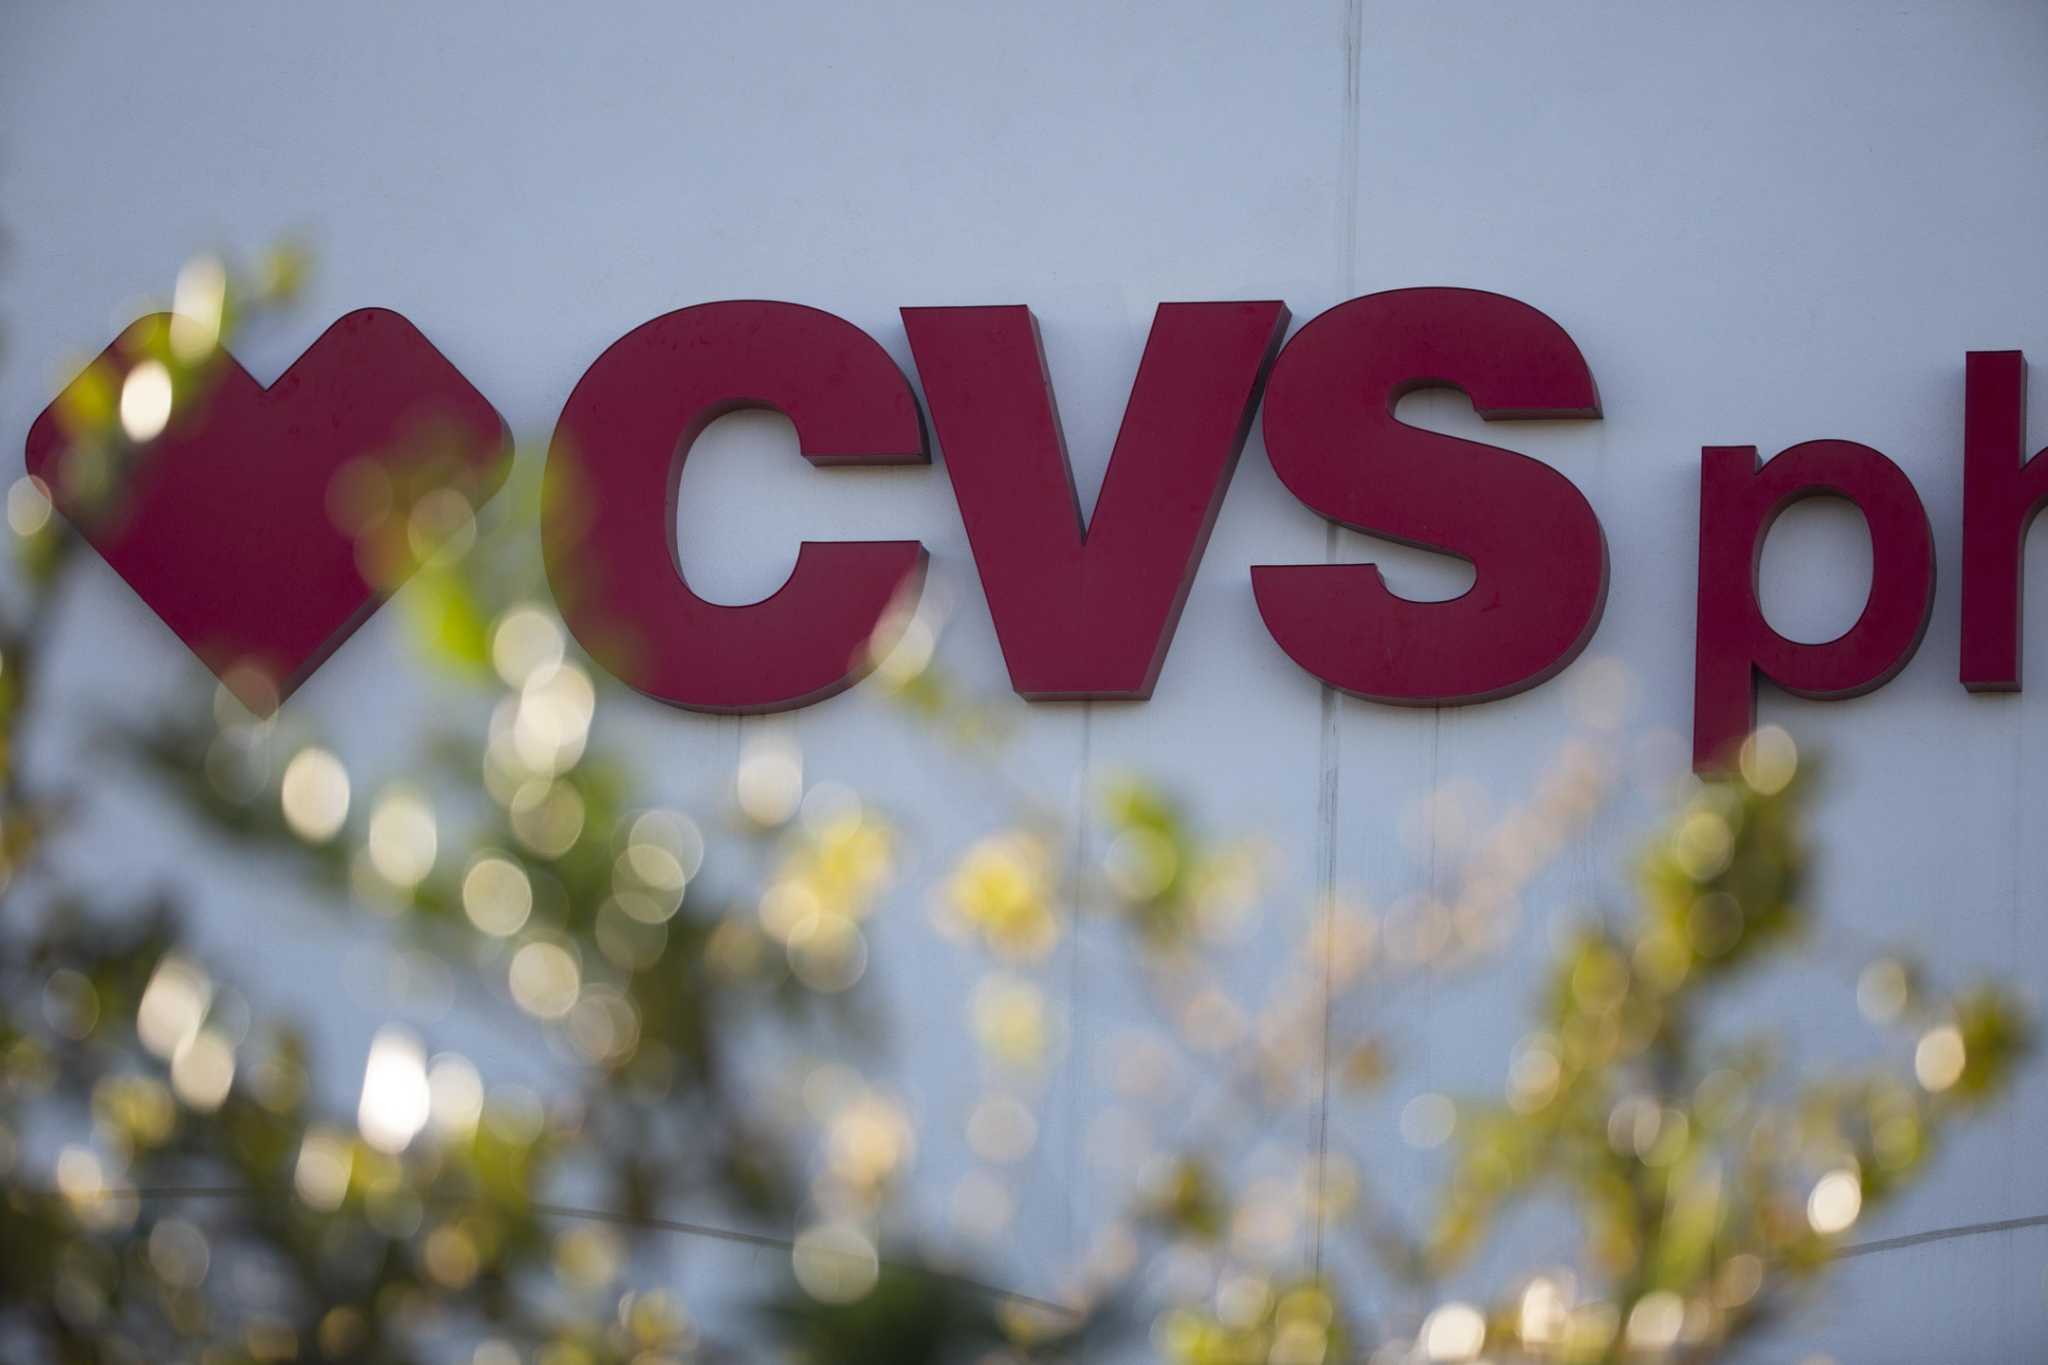 Houston brothers sentenced for selling $13M in stolen merchandise from CVS, Walgreens during scheme